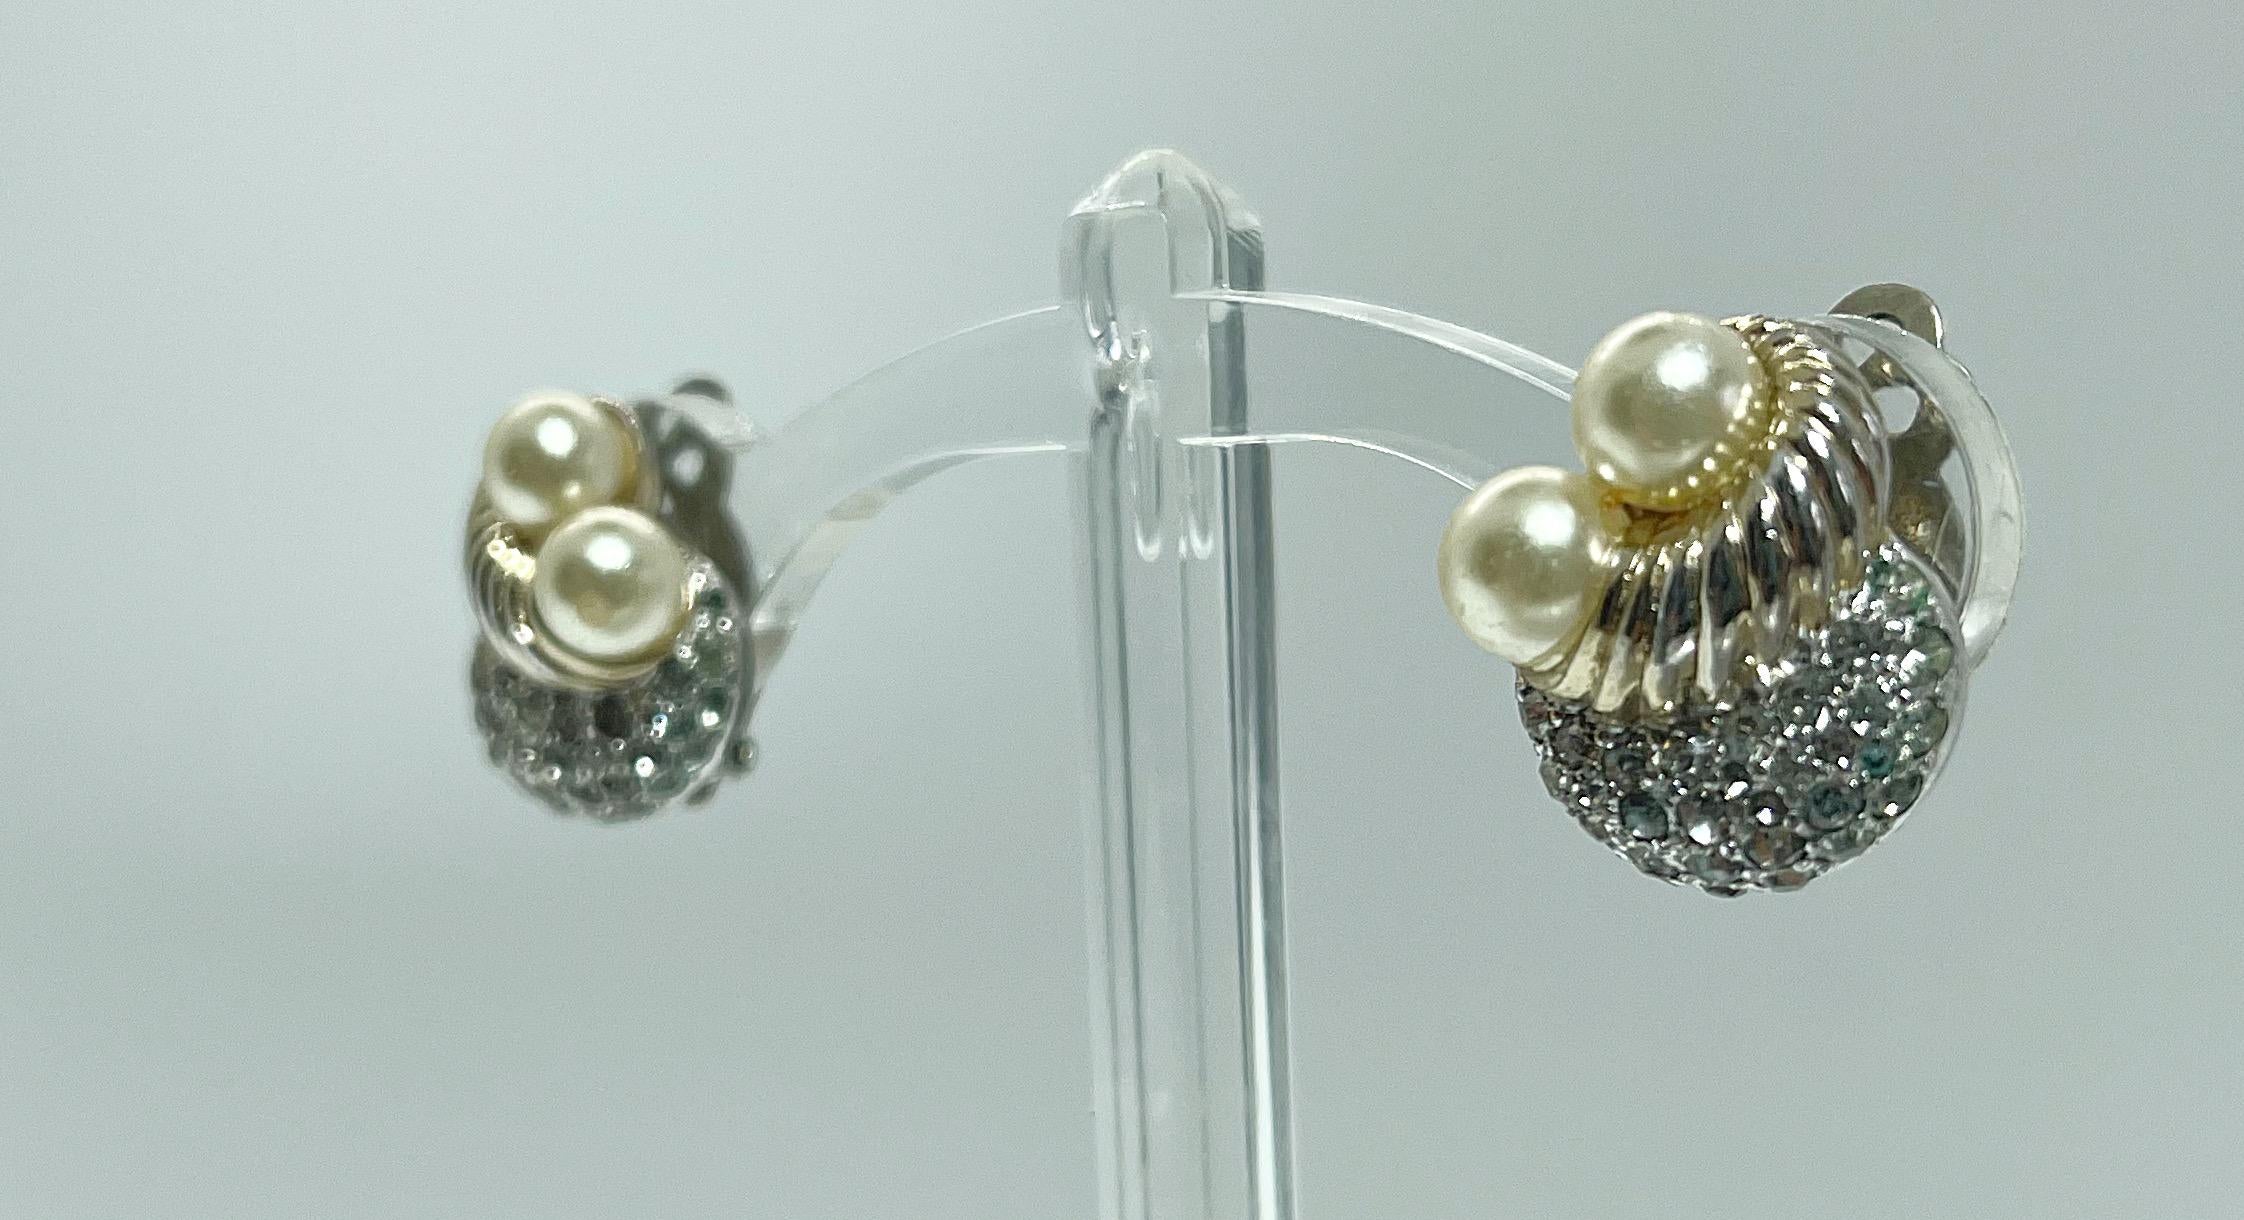 Chic early 60s JOMAZ gold and silver two tone clip-on earrings ! Features two medium size pearls on each earring, with sparkling rhinestones. Can easily be worn day to evening.
In great condition 